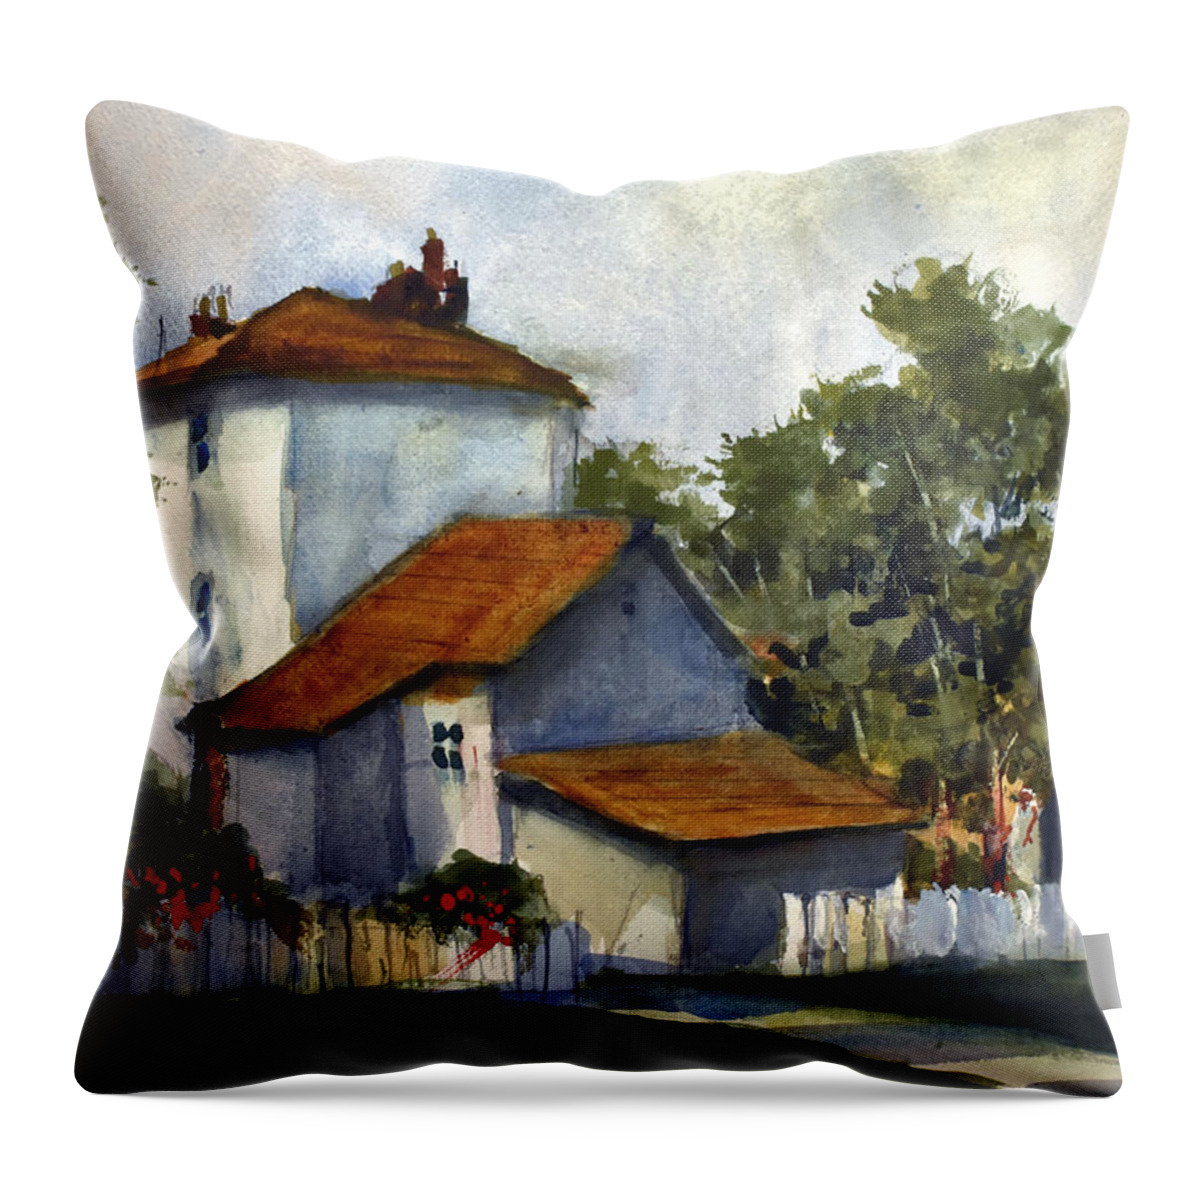 England. Ciuntry Throw Pillow featuring the painting English Sunny Afternoon by Charles Rowland